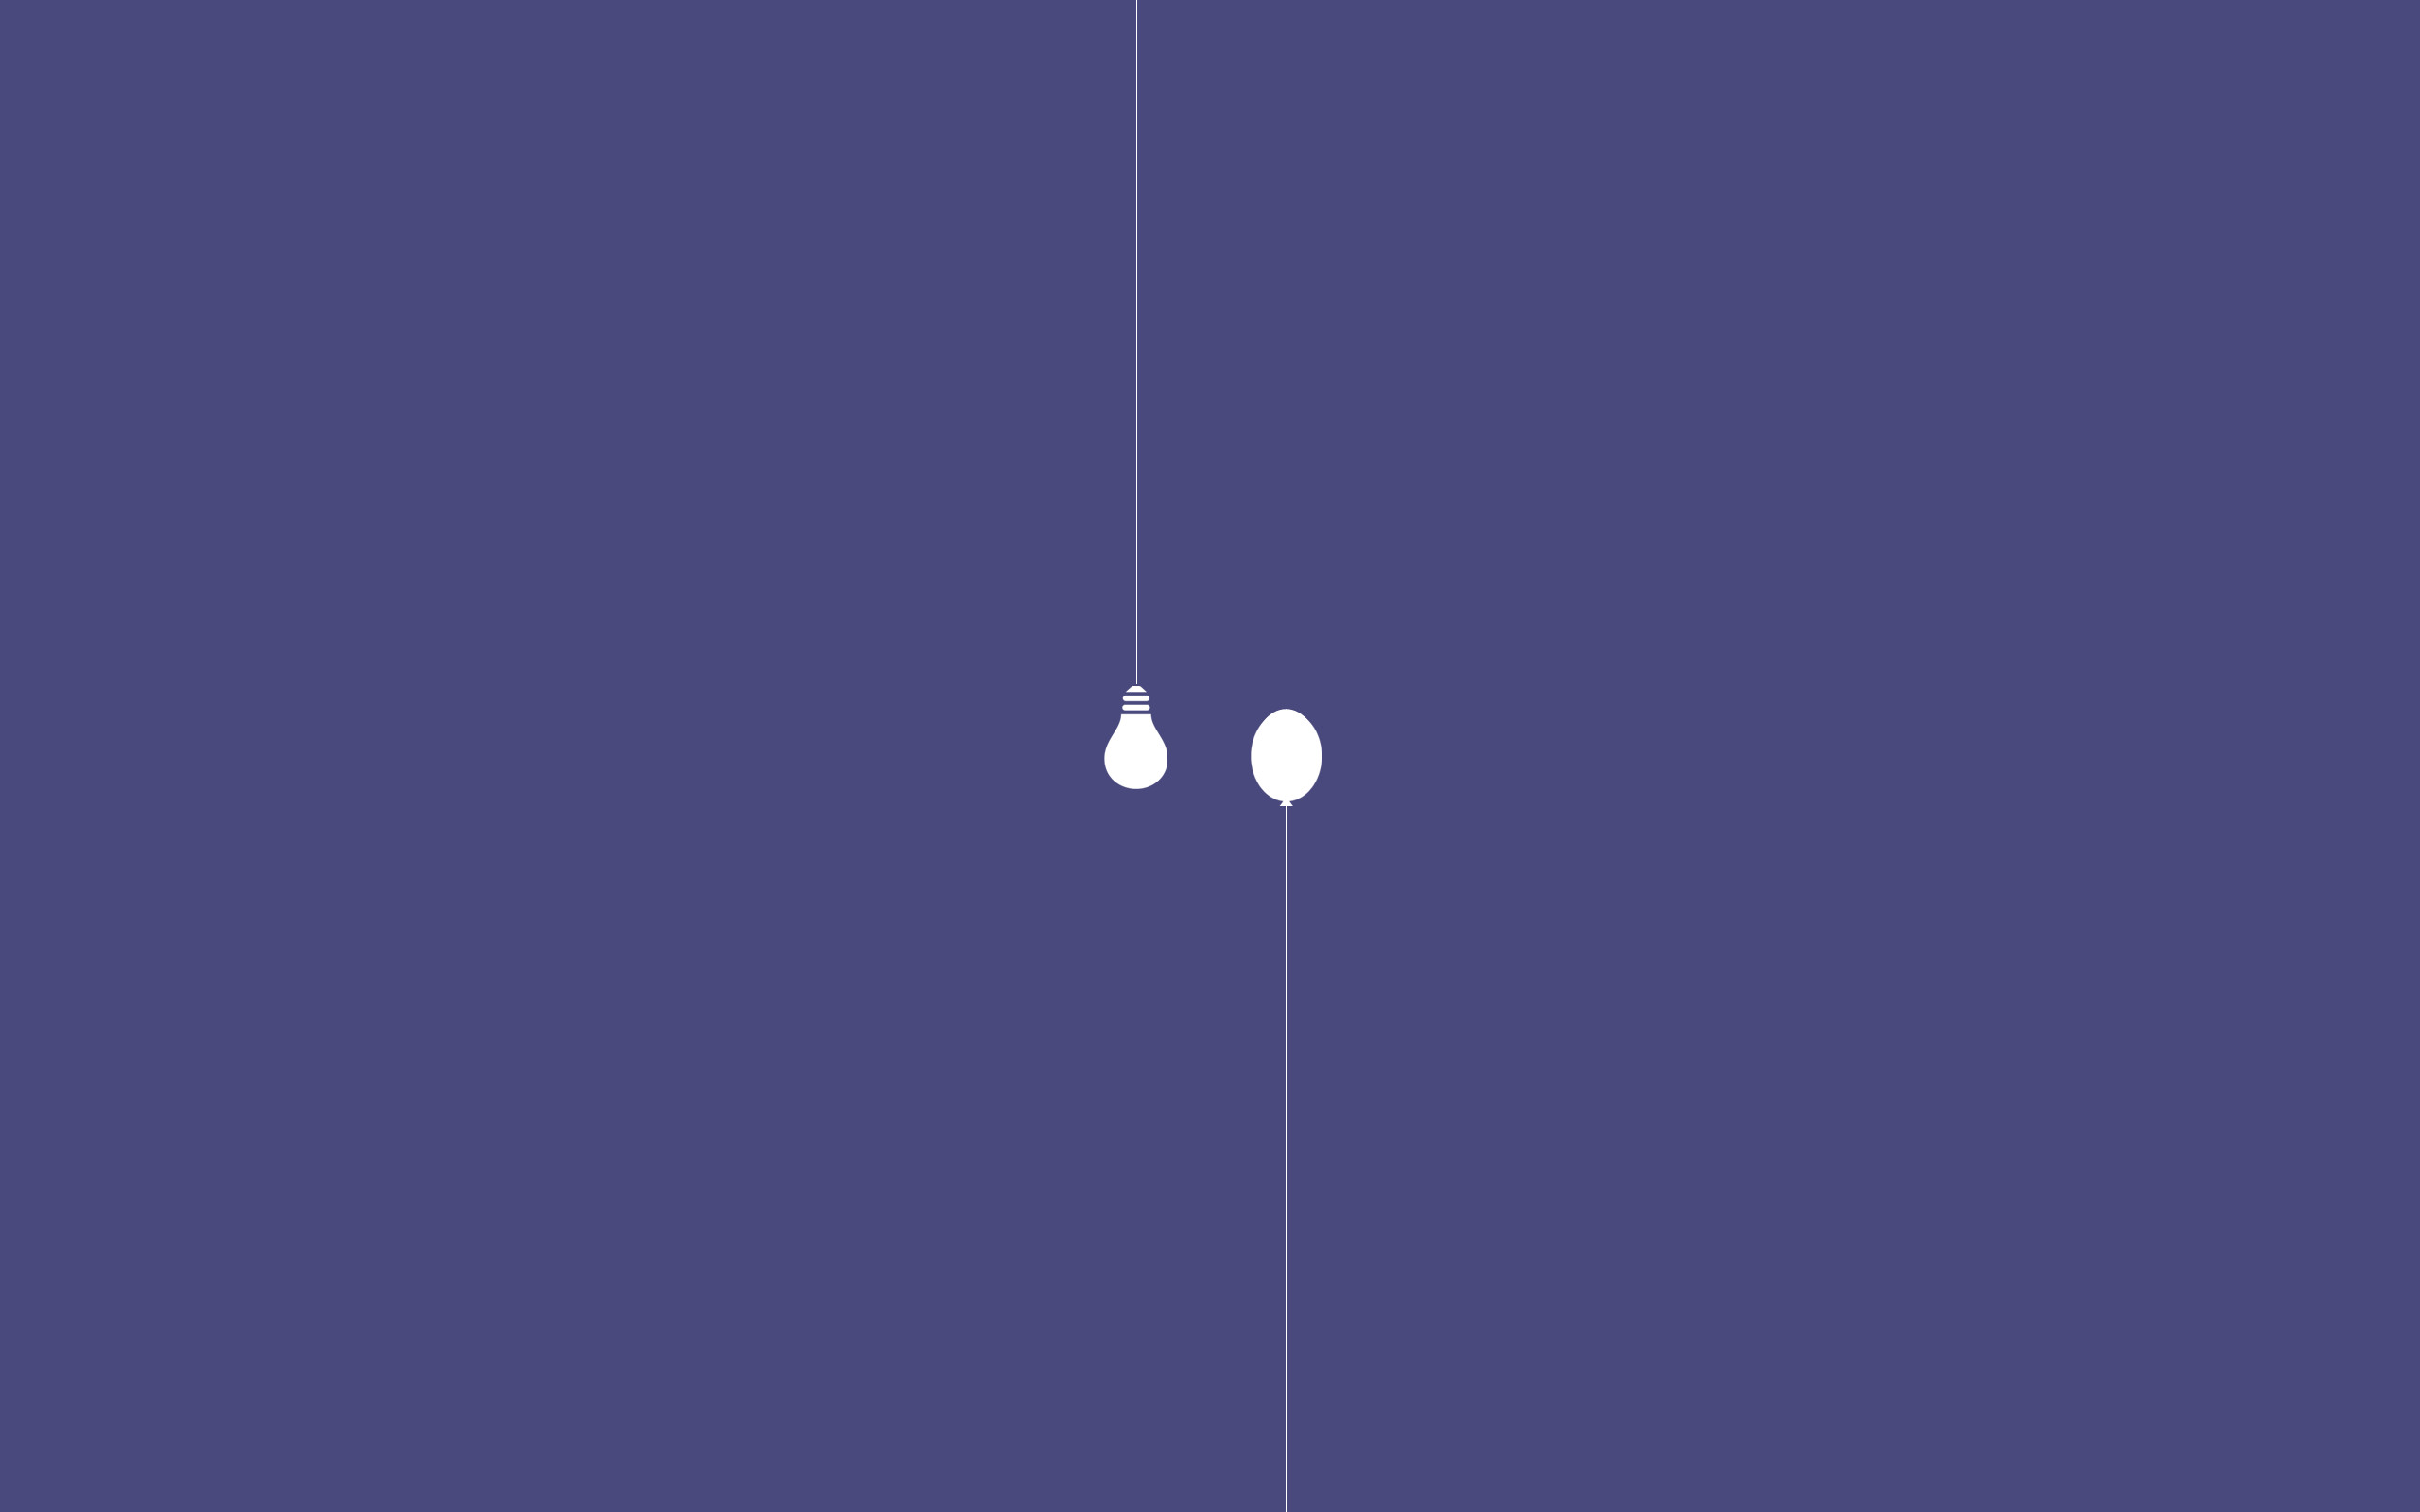 Bulb And Balloon Found On Minimal Wallpapers 2560x1600